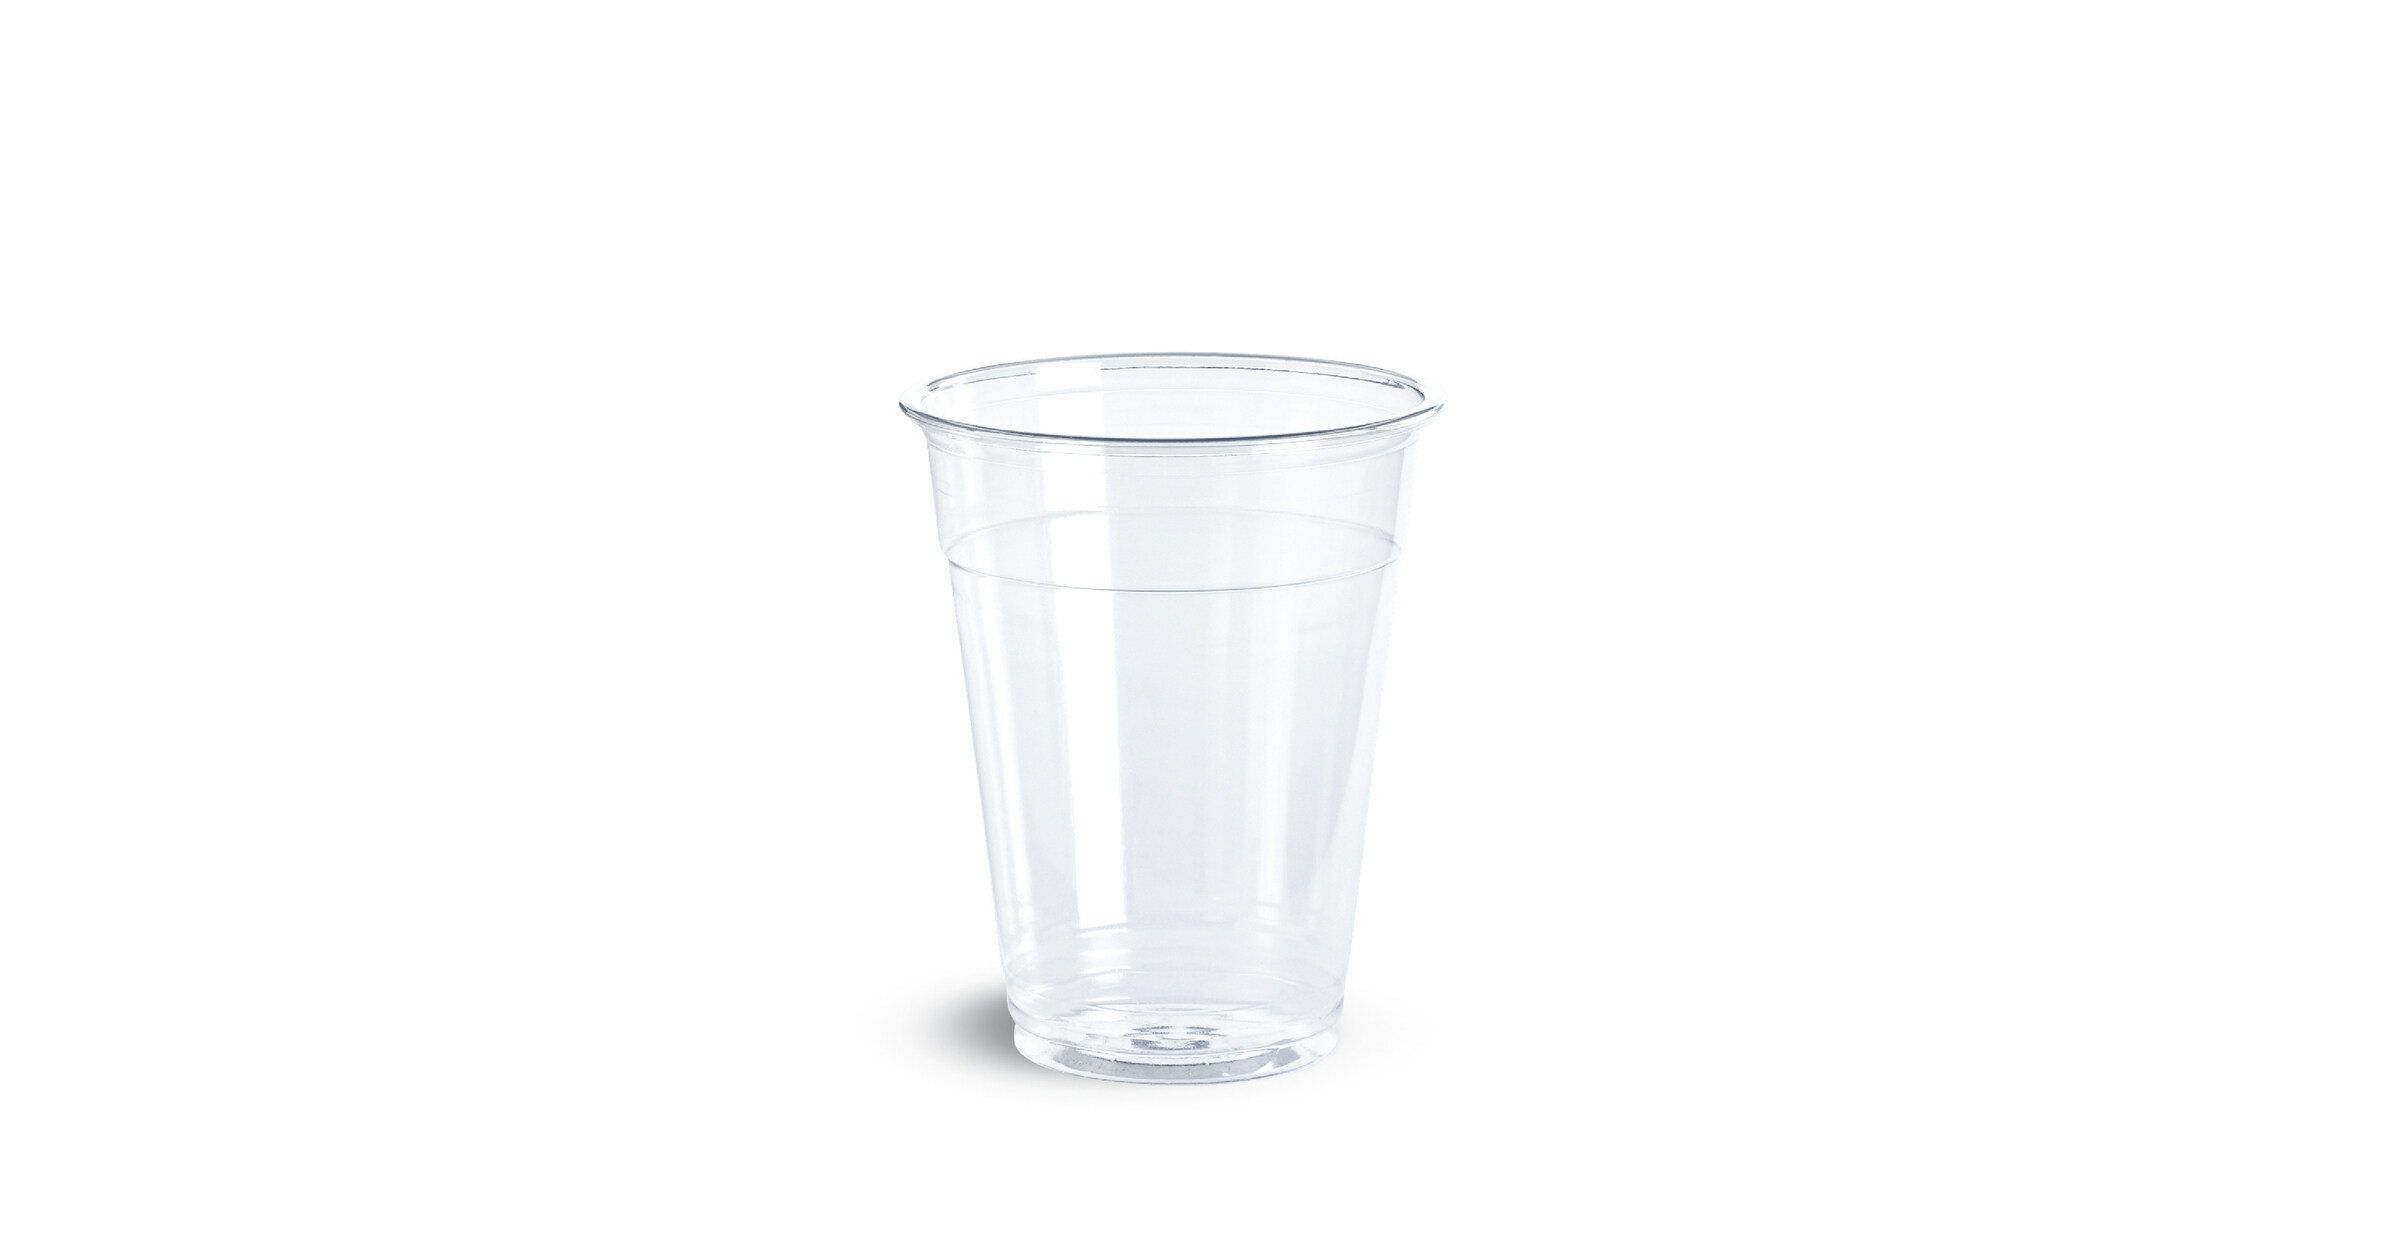 https://mma.prnewswire.com/media/2091352/Chinet_Classic_Recycled_Clear_Cup.jpg?p=facebook